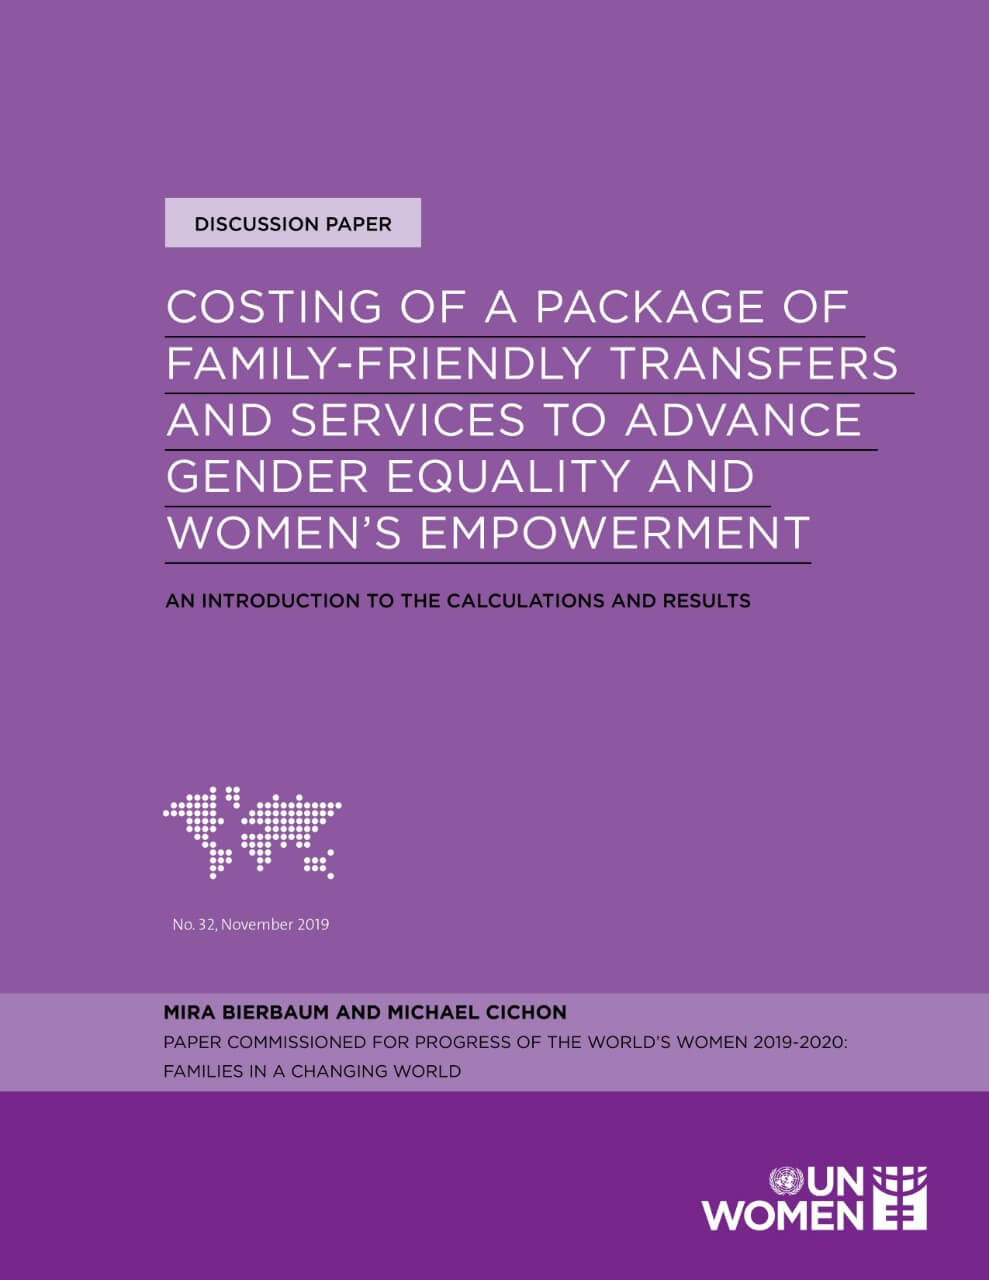 Costing of a package of family friendly transfers cover page